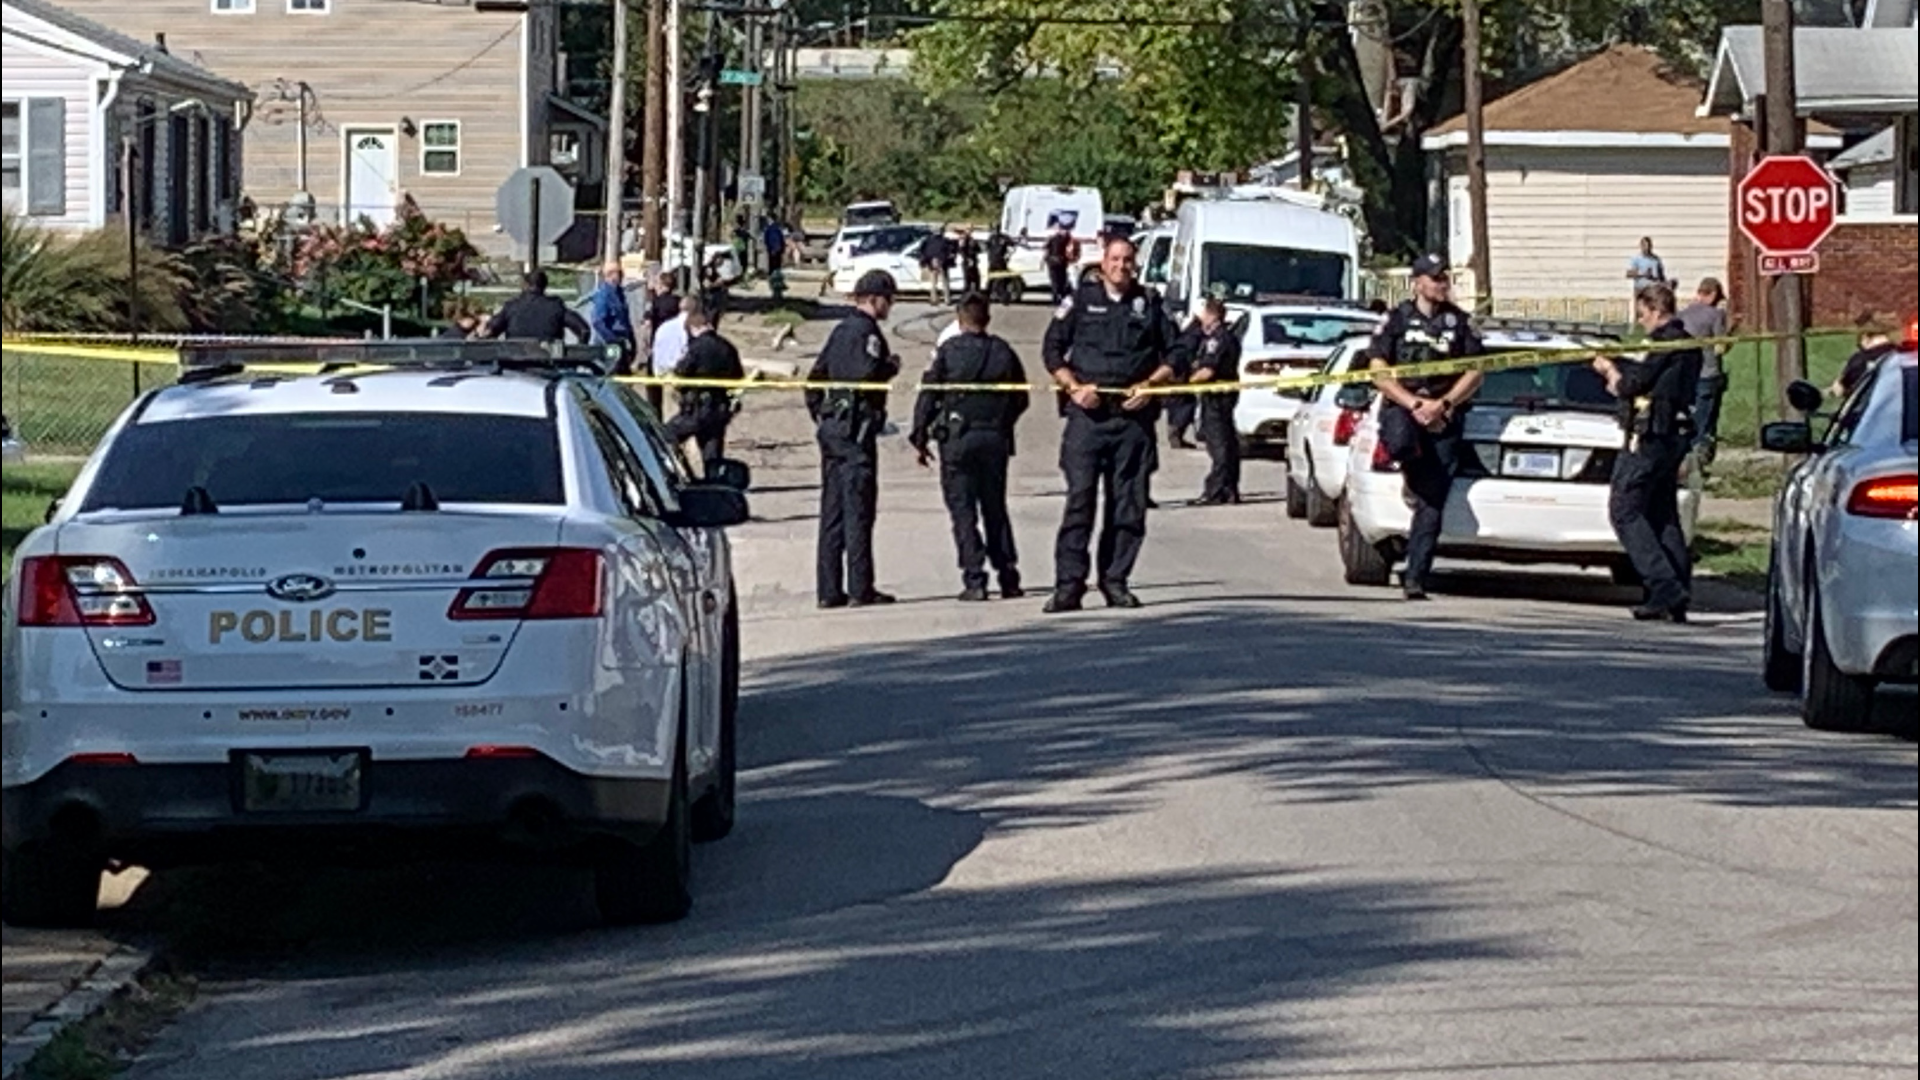 IMPD officers were involved in a shooting on Eugene Street on Sept. 24 just after 2:30 p.m.